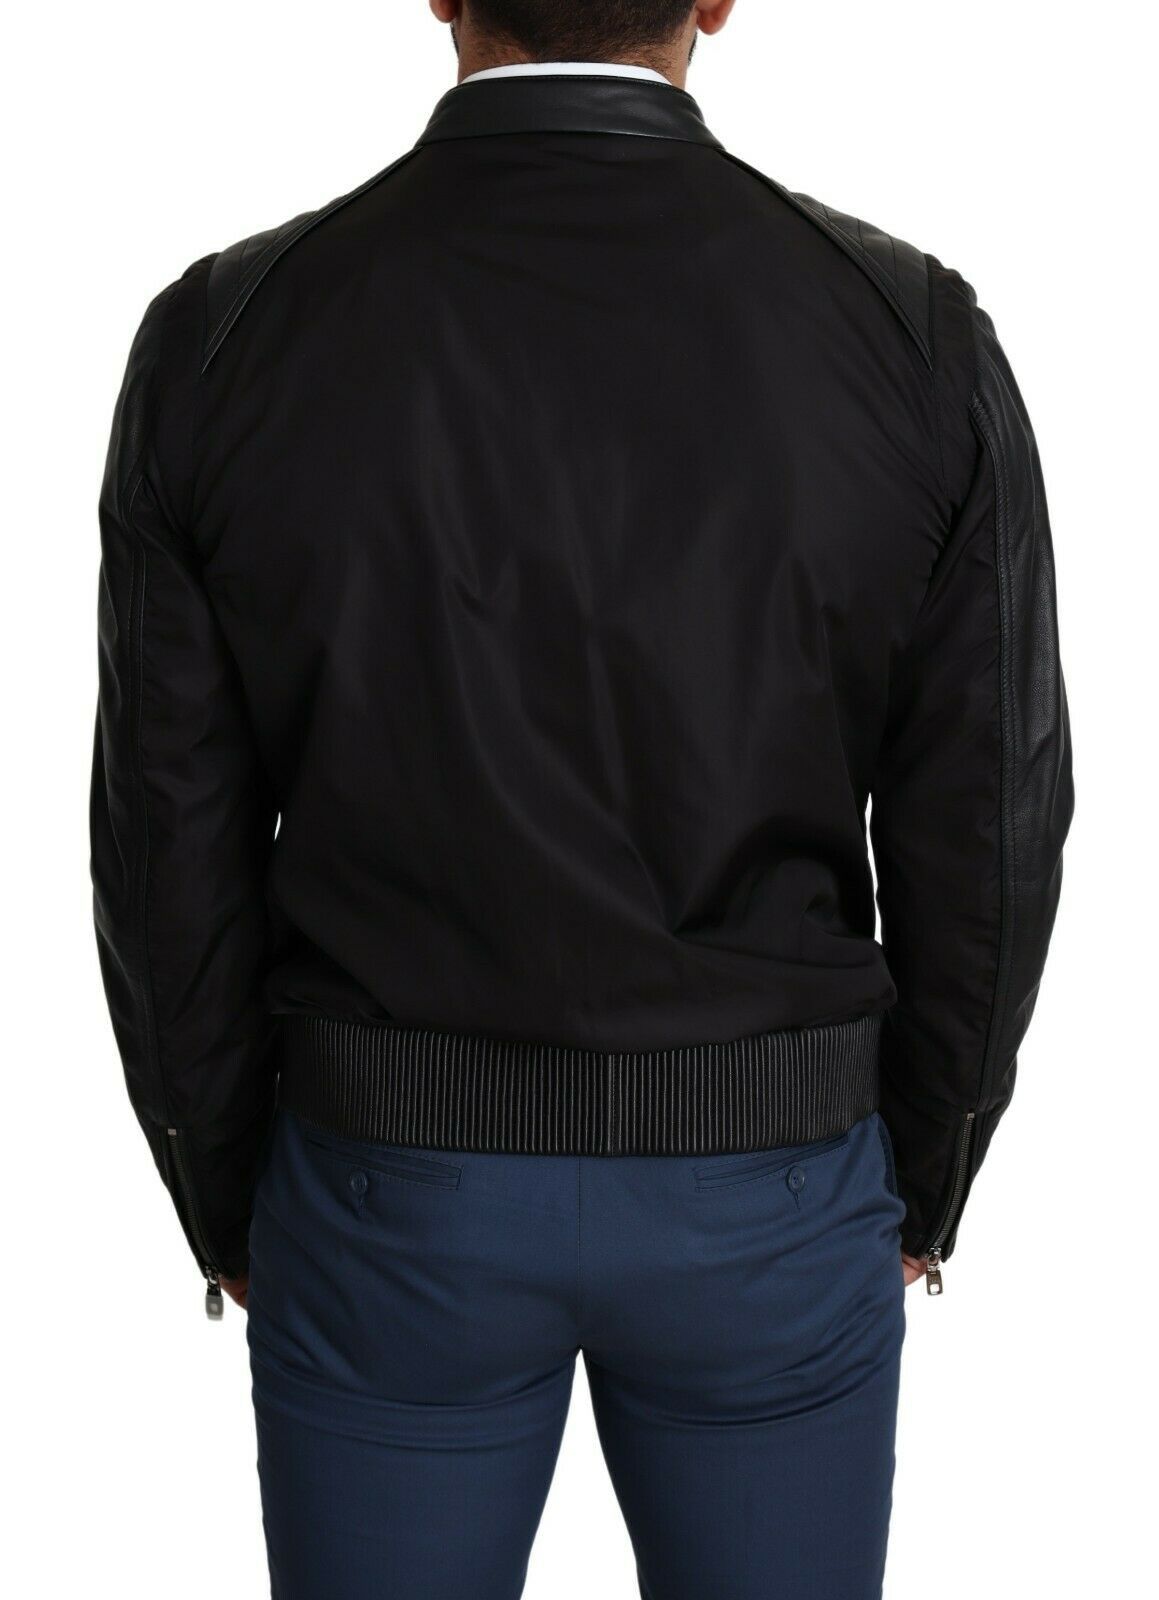 Dolce & Gabbana Elegant Black Bomber with Leather Accents